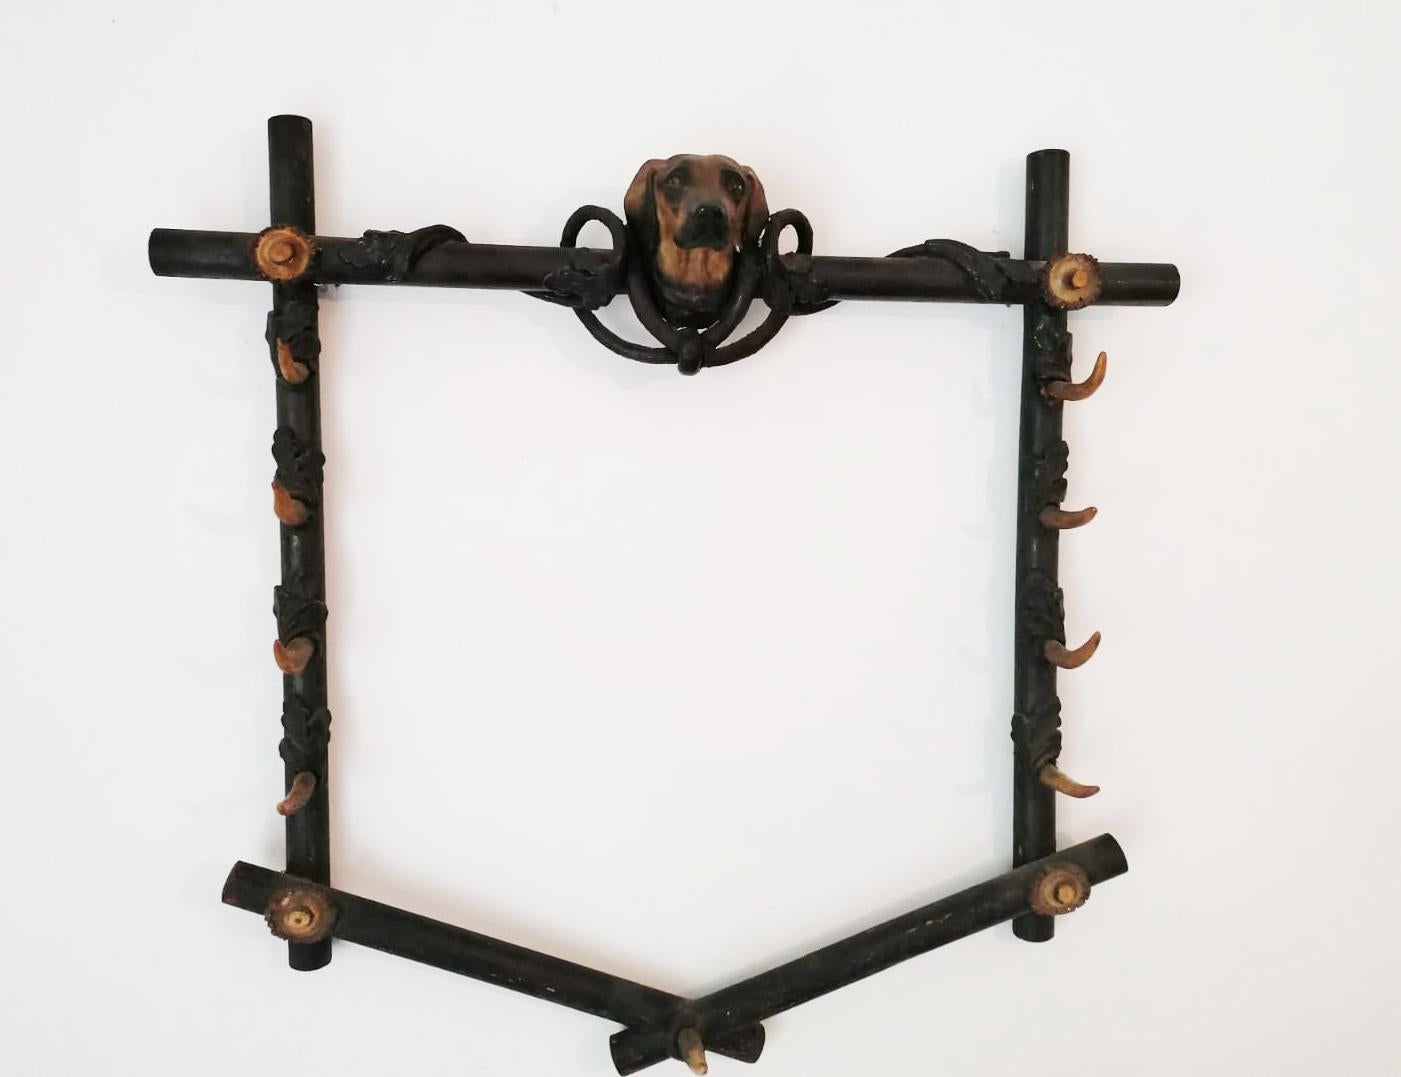 Walnut wood frame with antler part as holder fixed with bone glue, dog head made of wood and a mix of wood chips and bone glue painted, glass eyes. Made in Austria in the 1860s
(The walking stick is just for demonstration of the function and belong